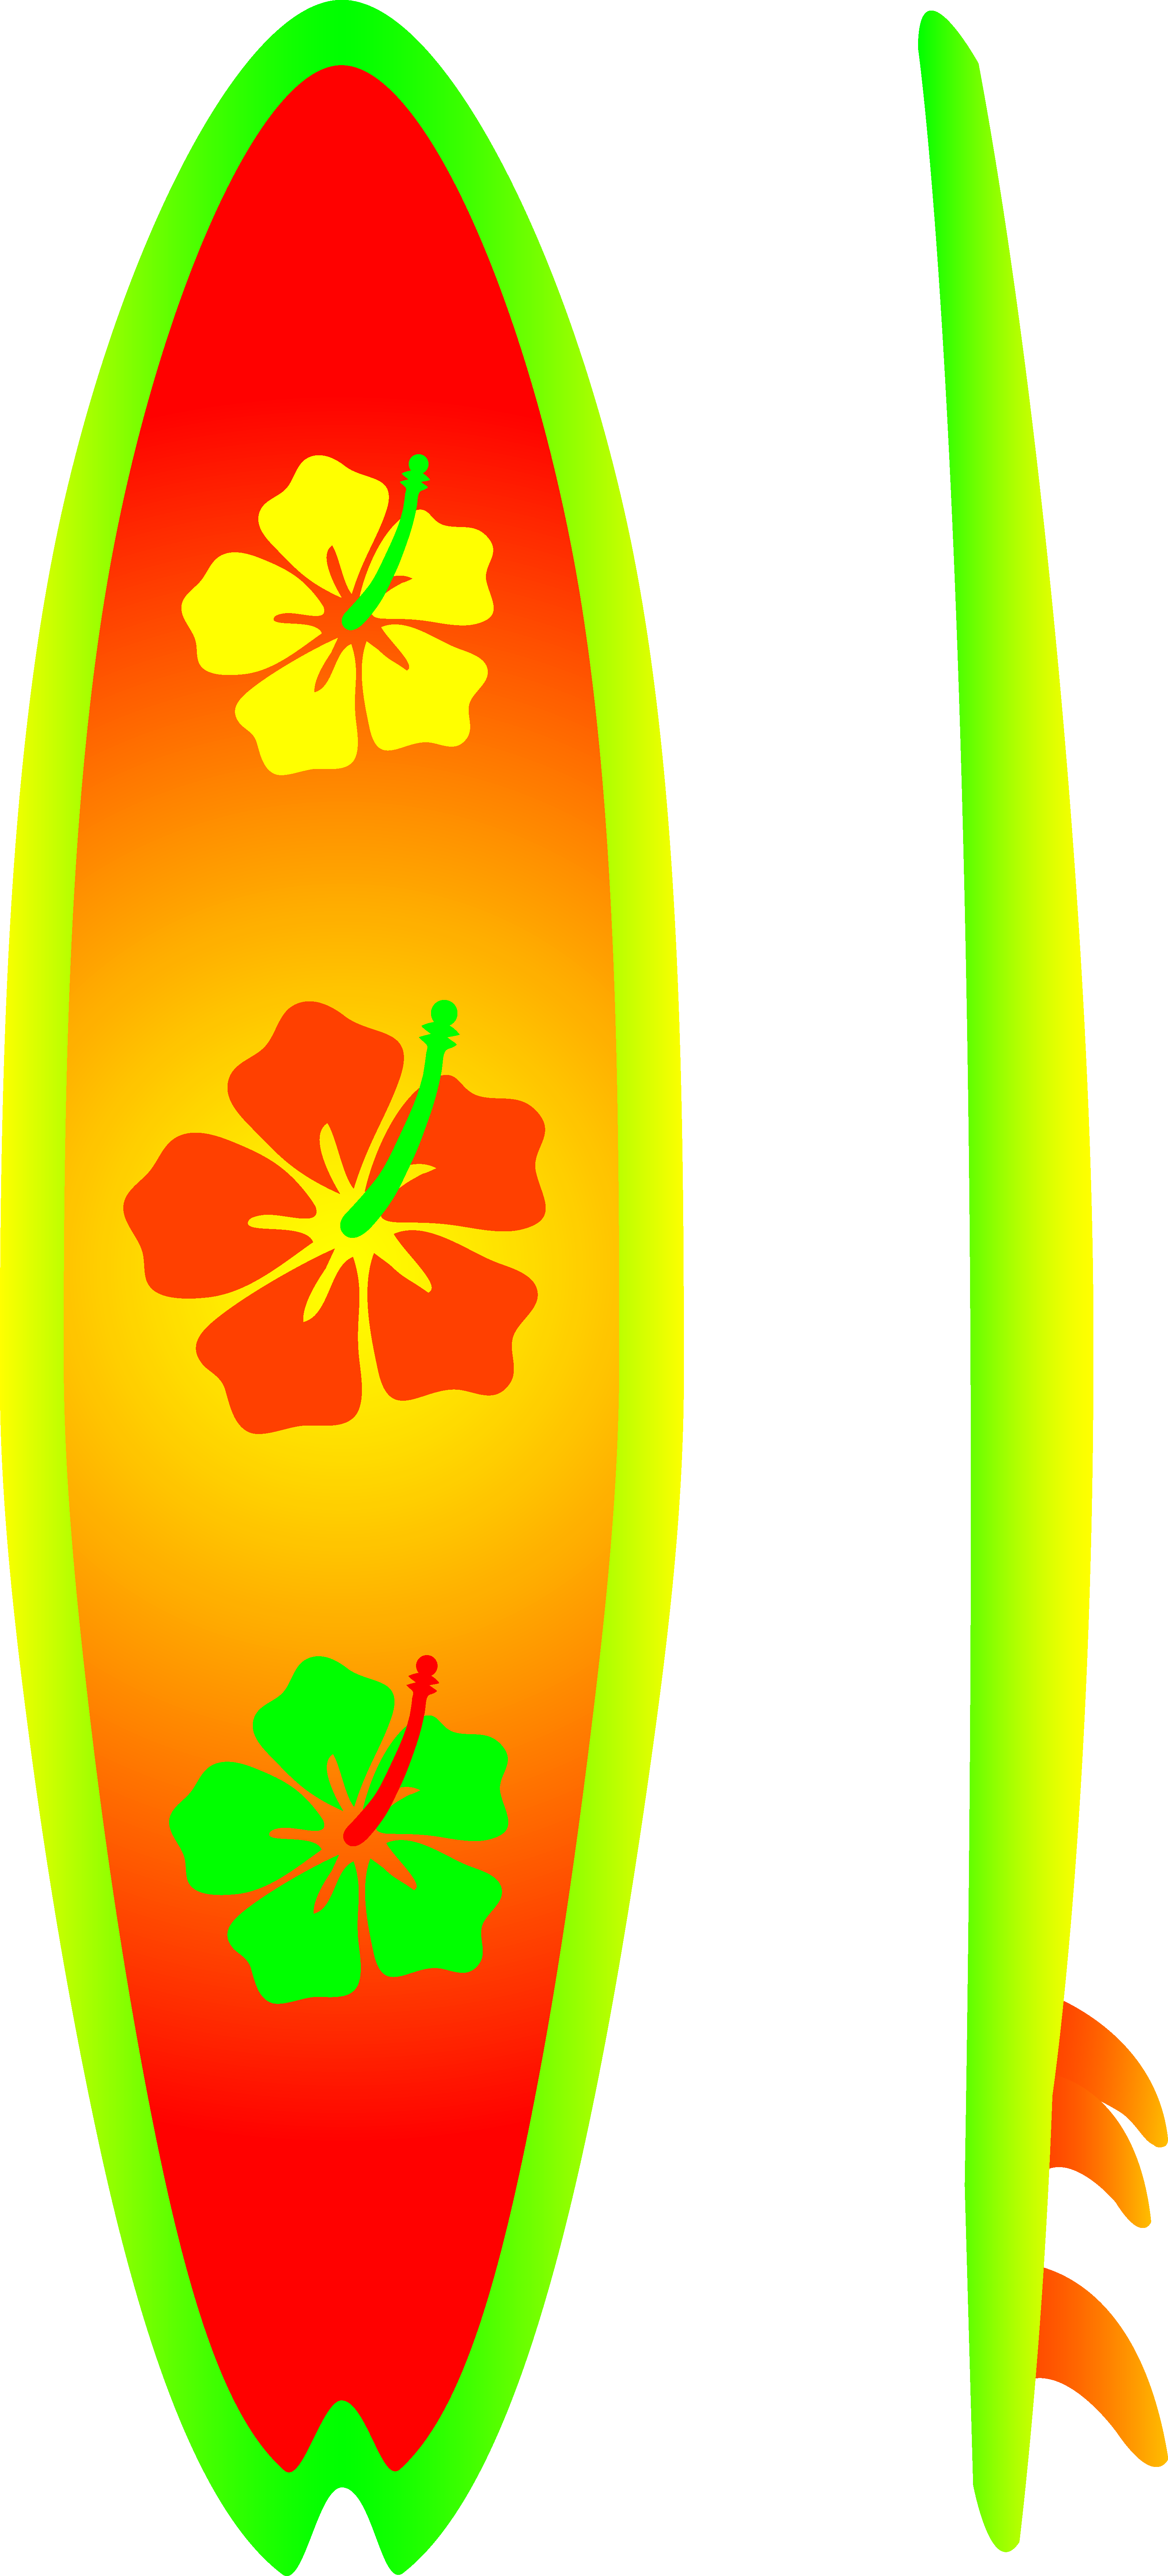 Featured image of post Cartoon Surf Board Clipart Pngtree offers cartoon surfboard png and vector images as well as transparant background cartoon surfboard clipart images and psd files